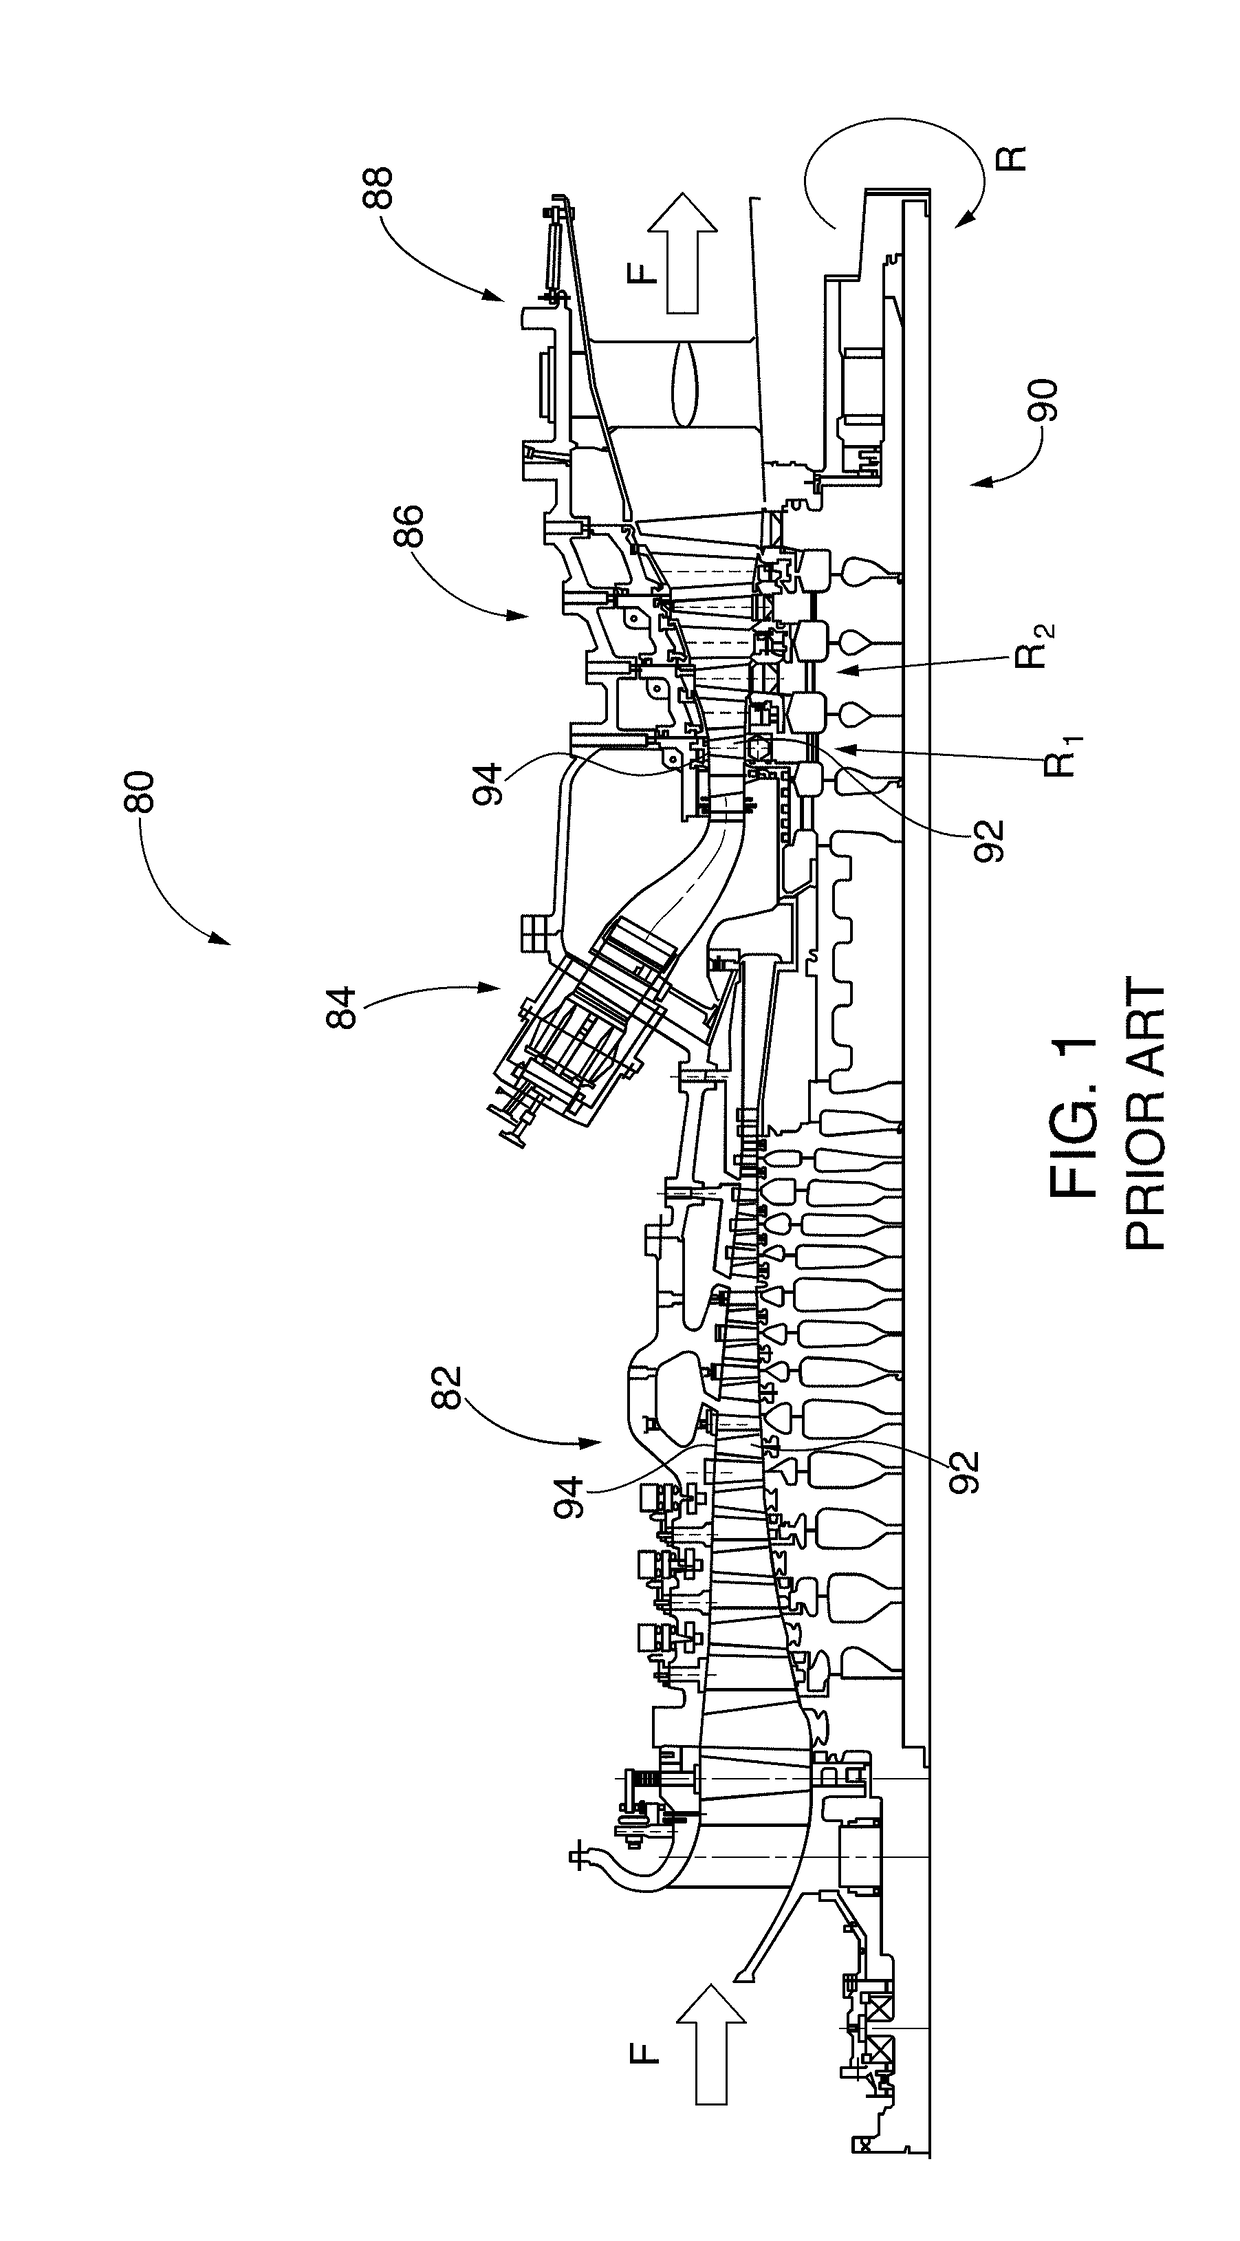 Turbine shroud with abradable layer having dimpled forward zone